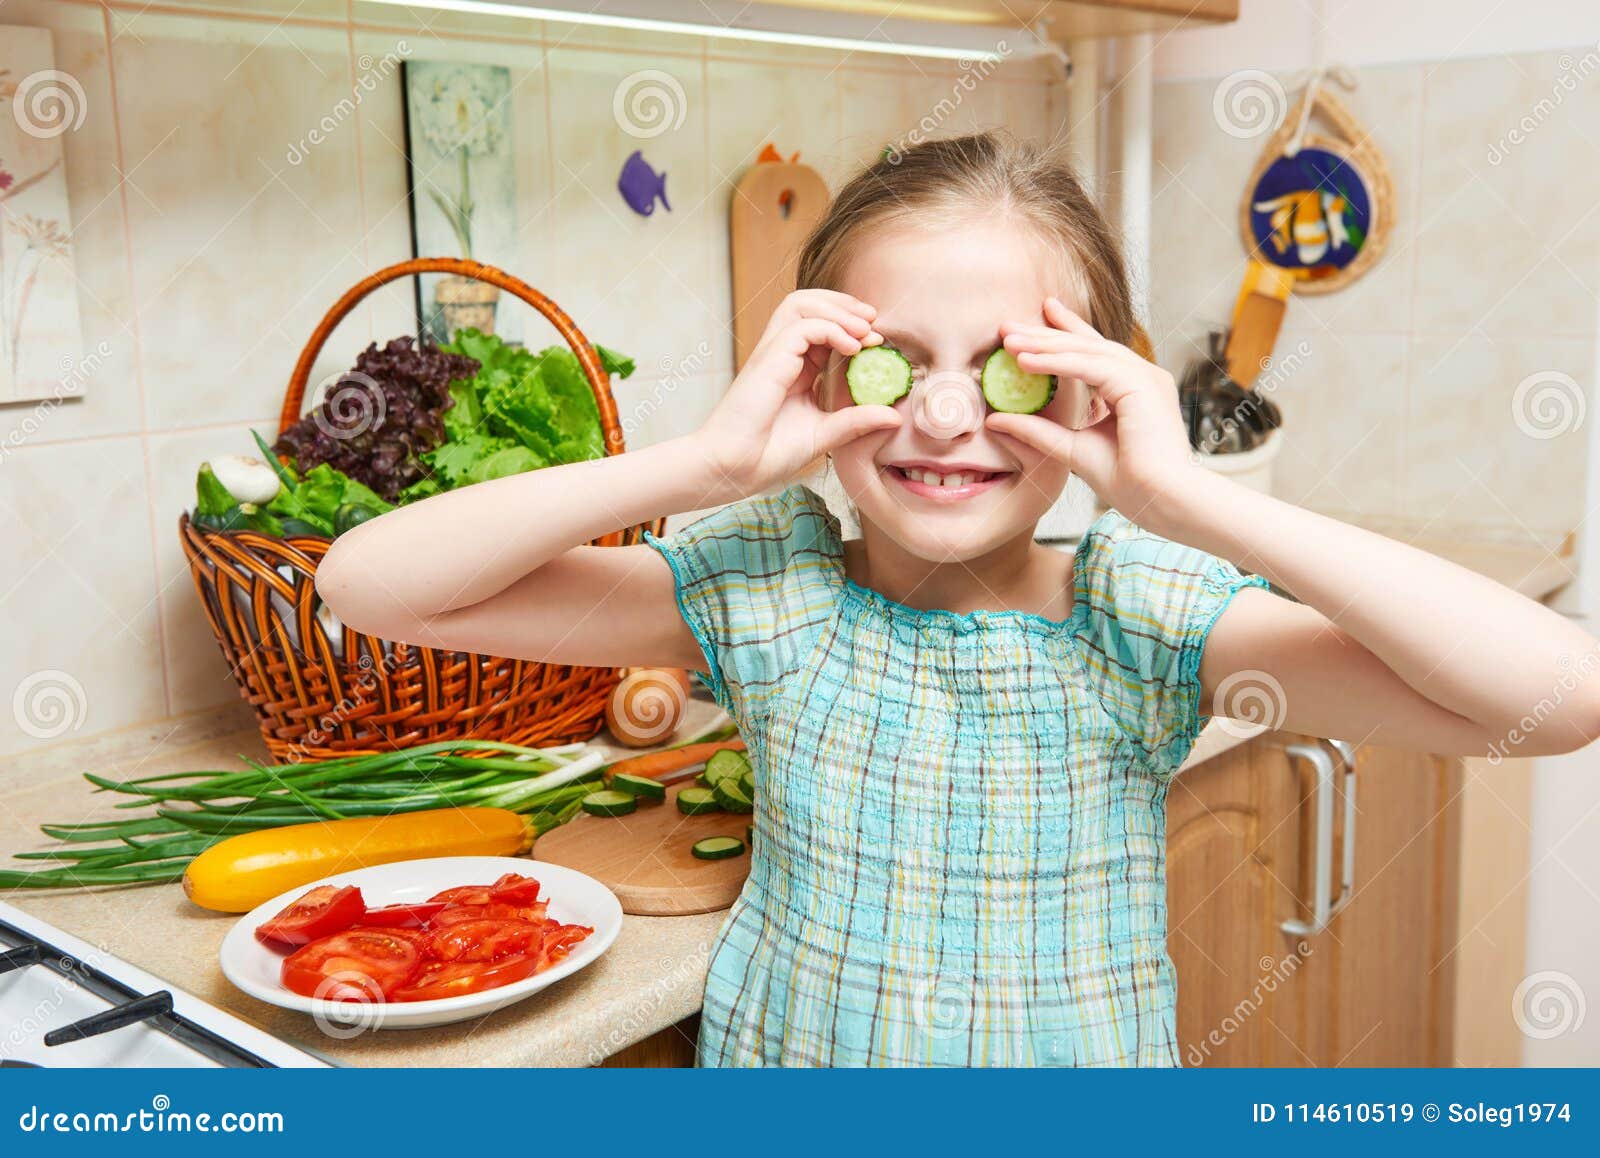 Girl Closes Her Eyes With Cucumbers And Have Fun In Home Kitchen